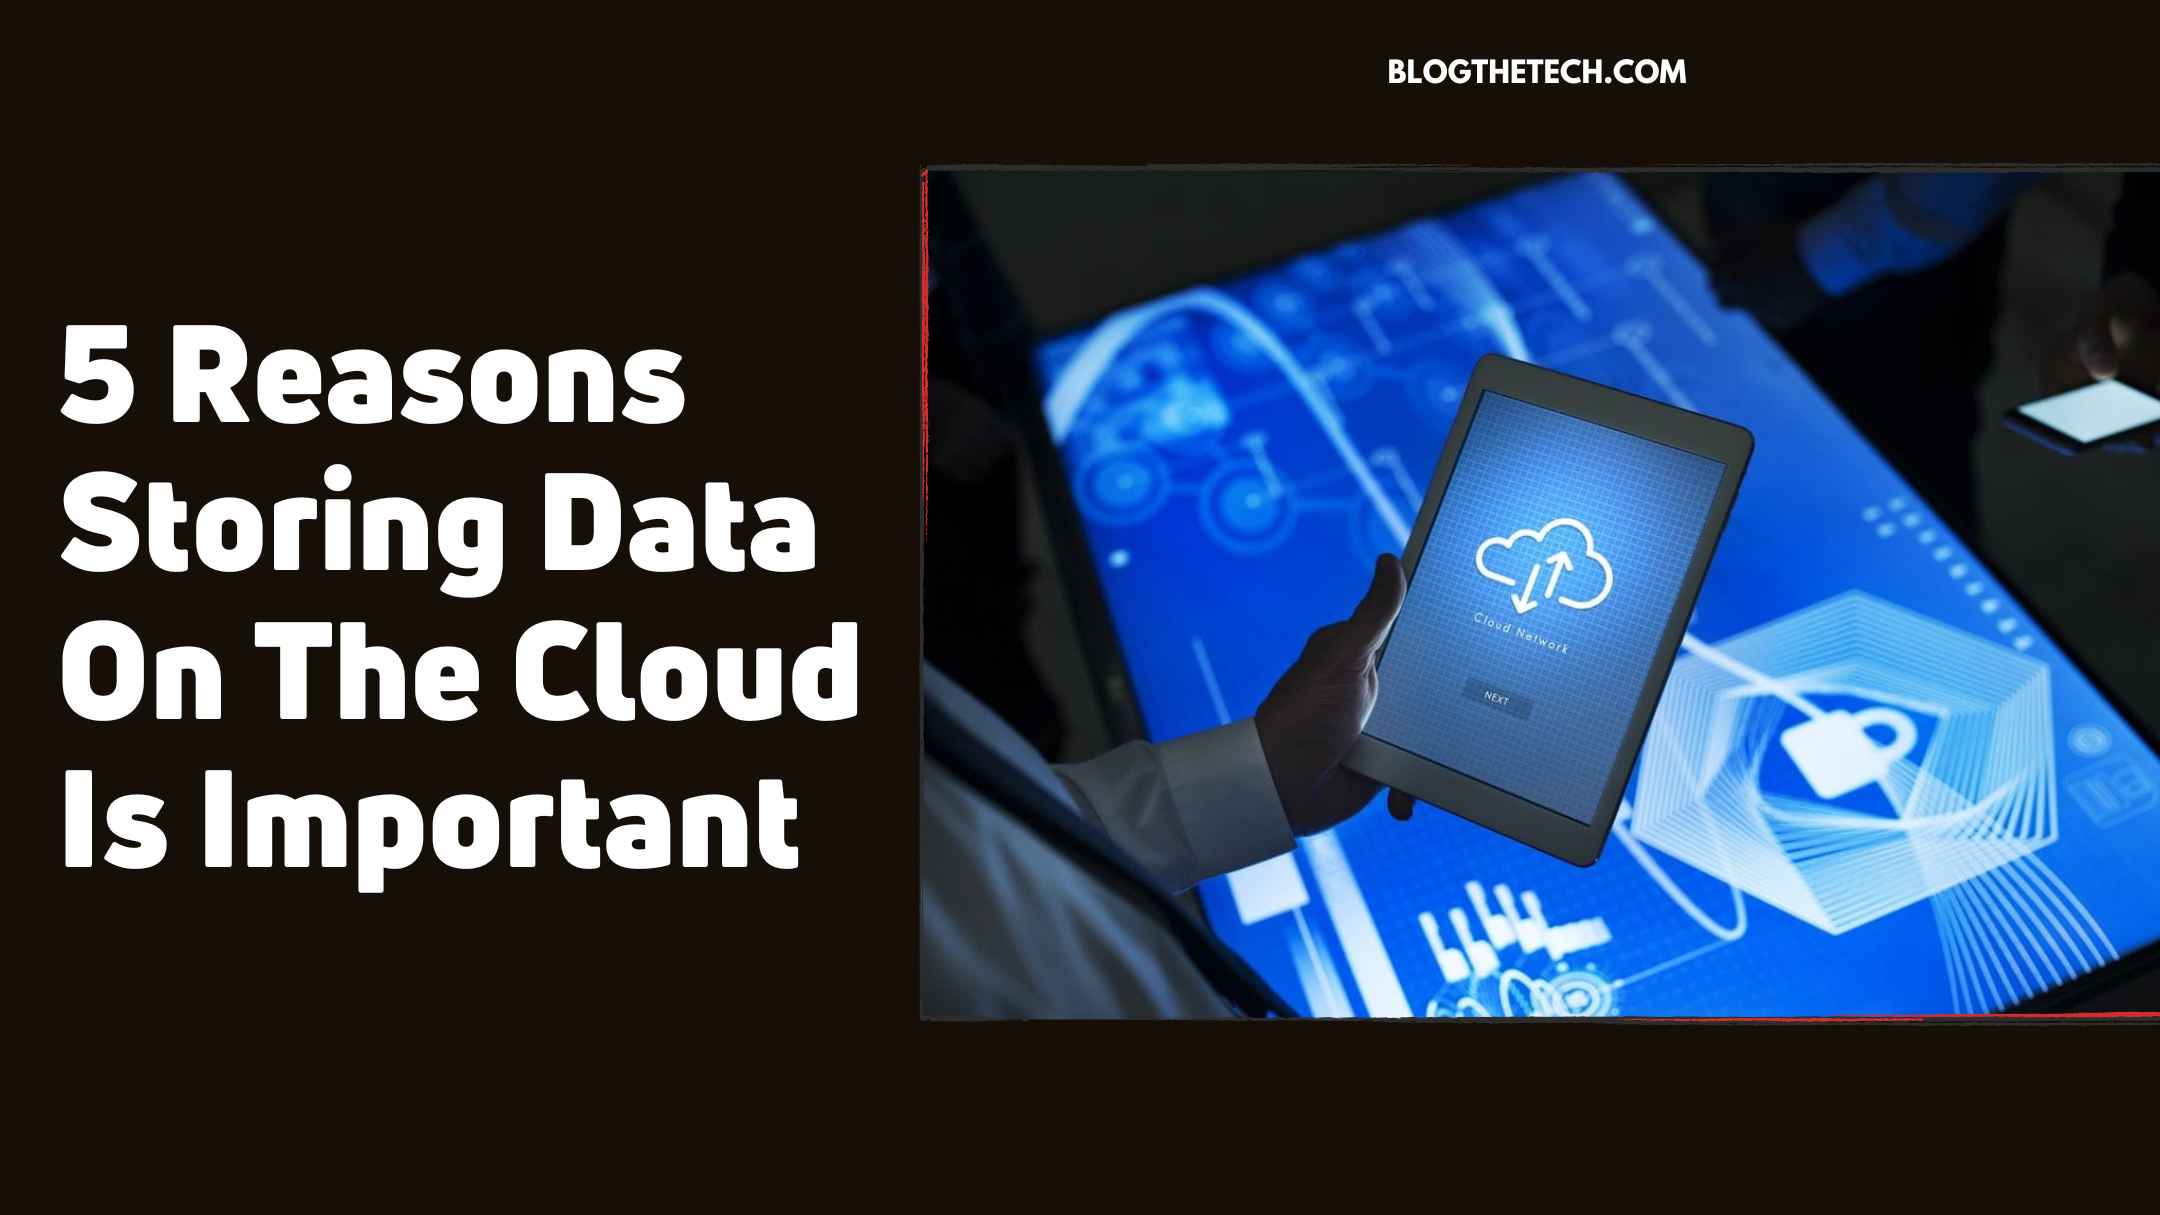 5 Reasons Storing Data On The Cloud Is Important